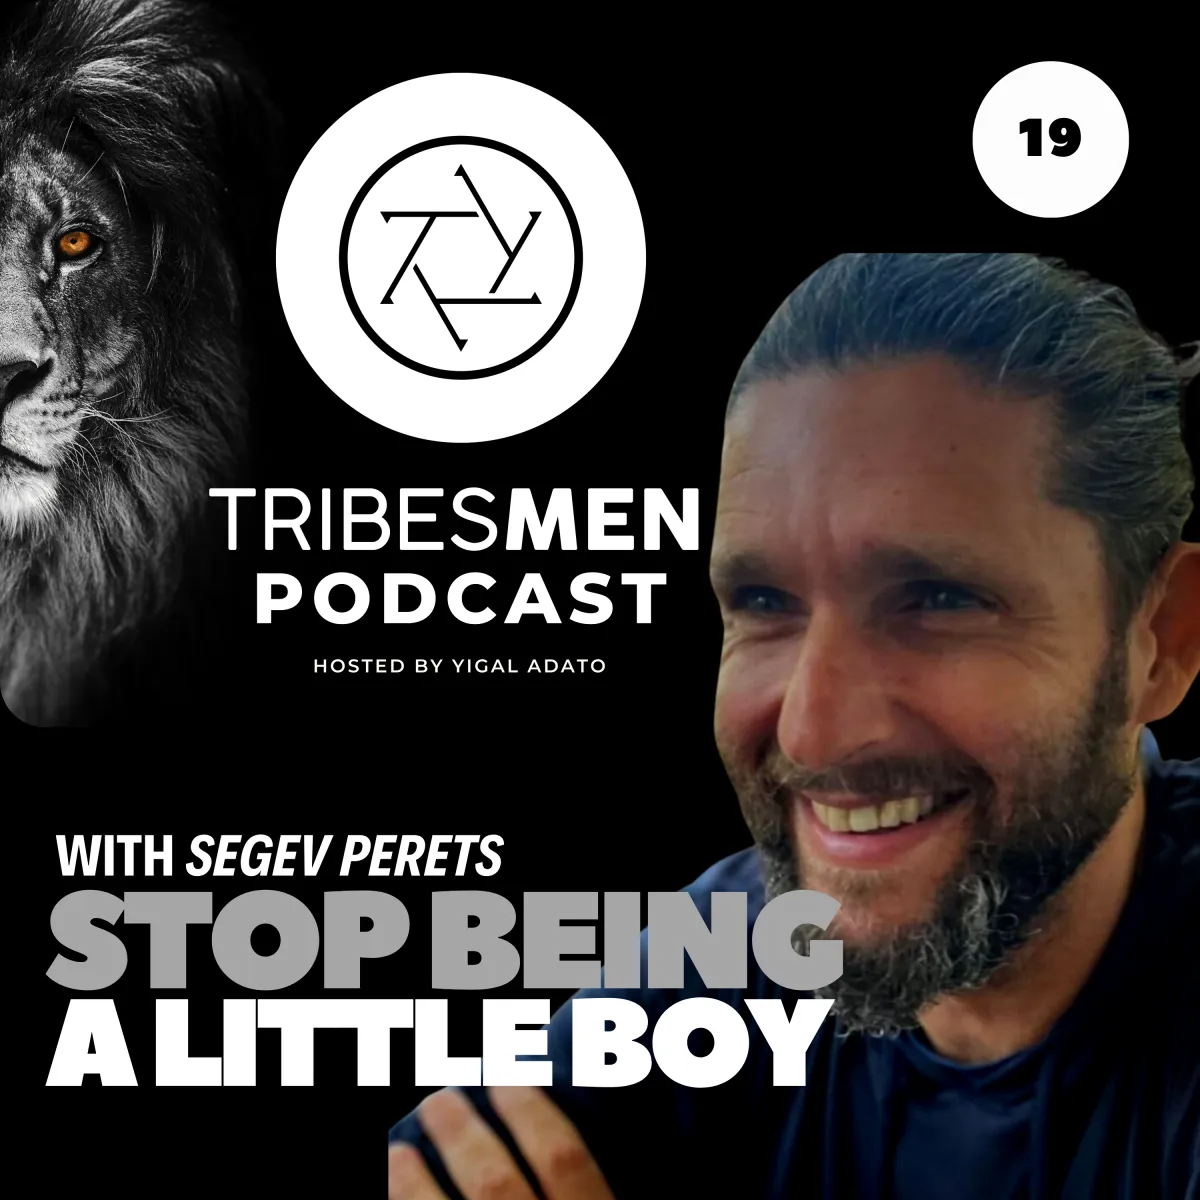 Tribesmen Podcast Episode 19 with Segev Perets